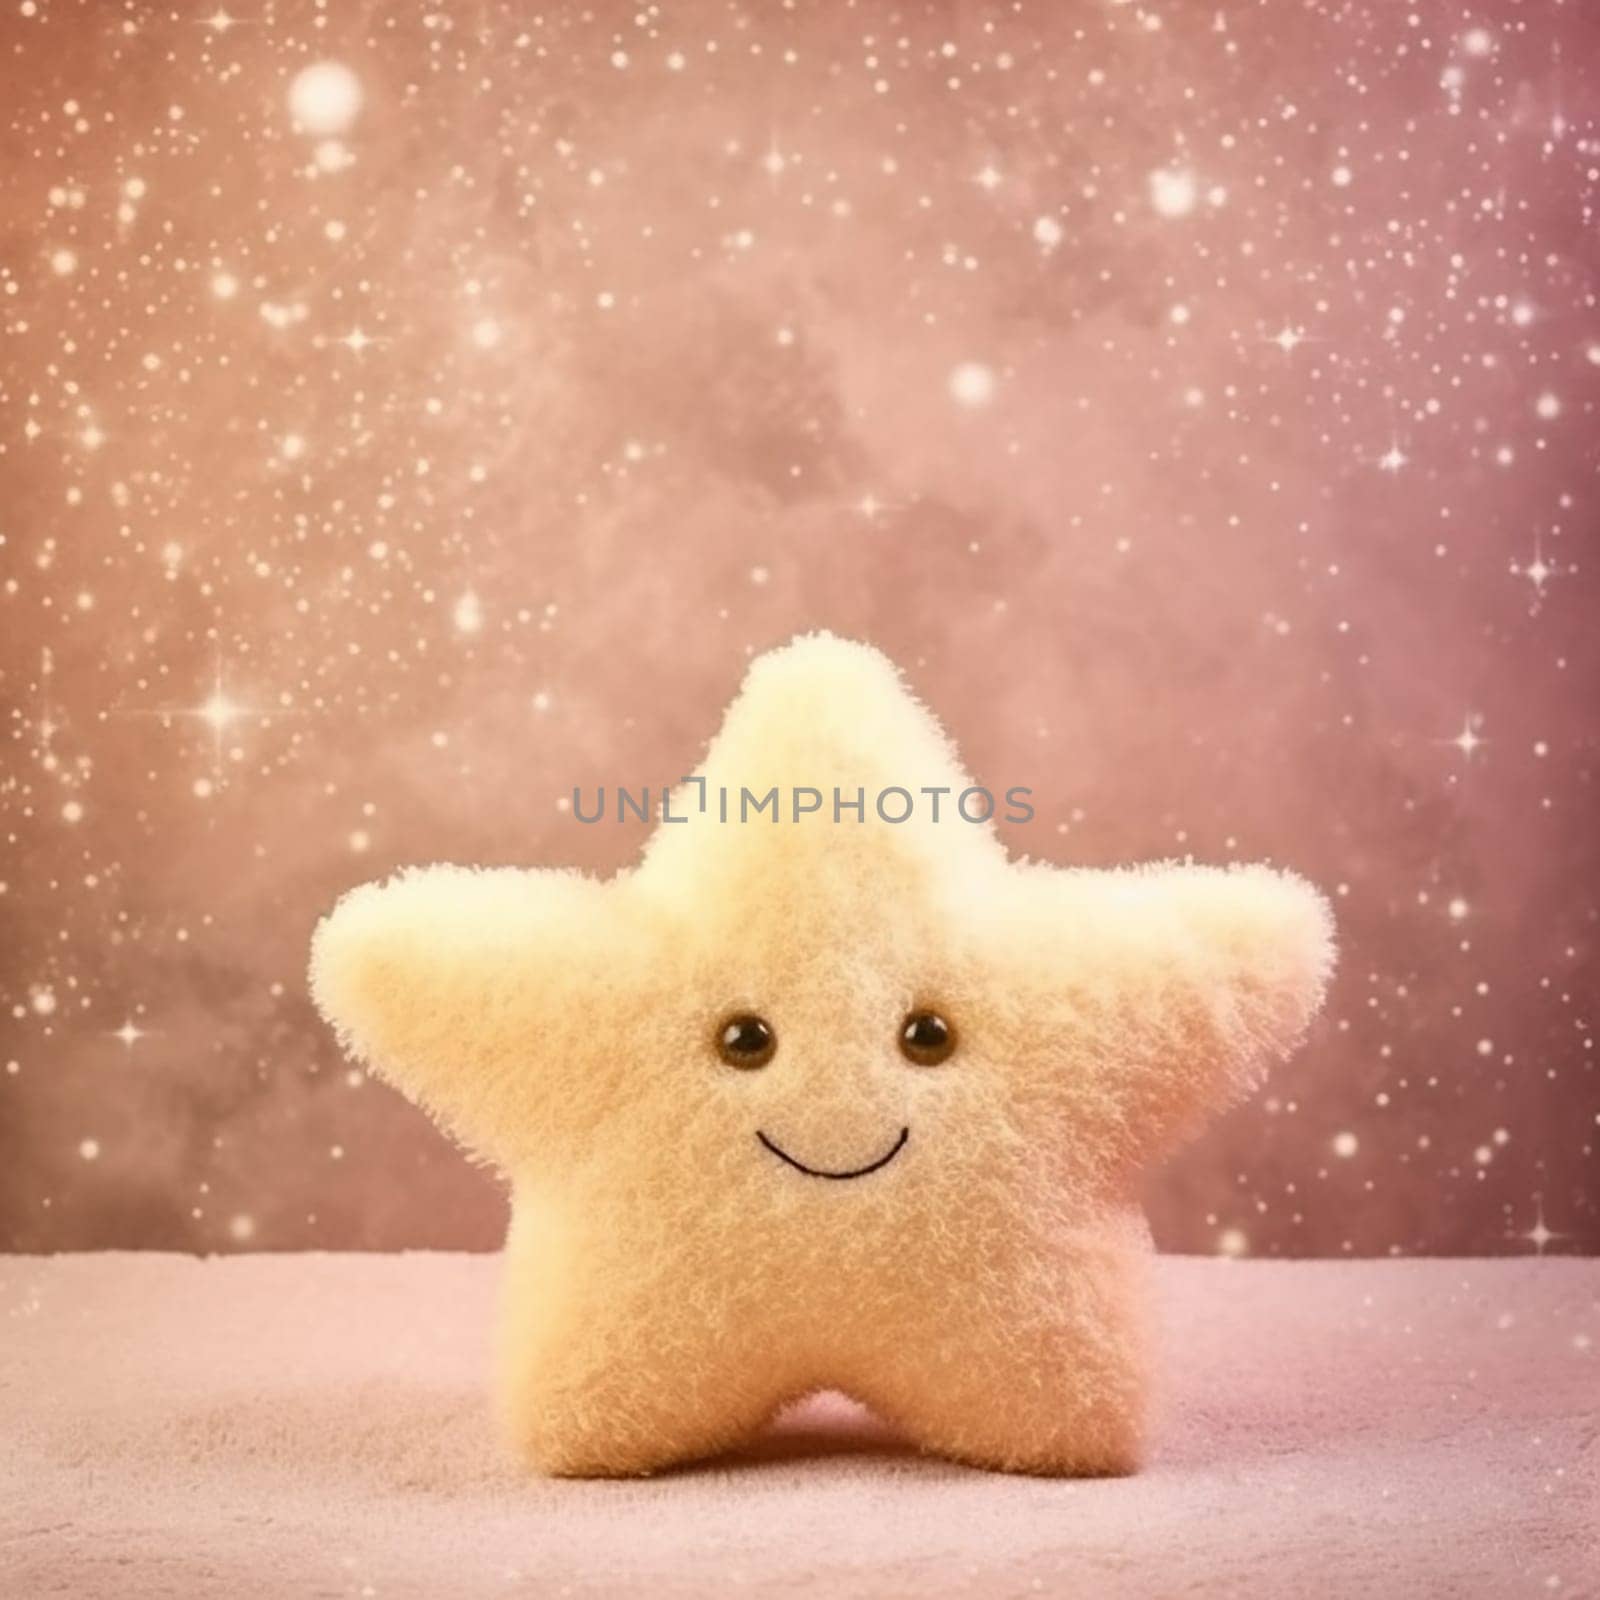 A smiling plush star against a glittery pink backdrop.